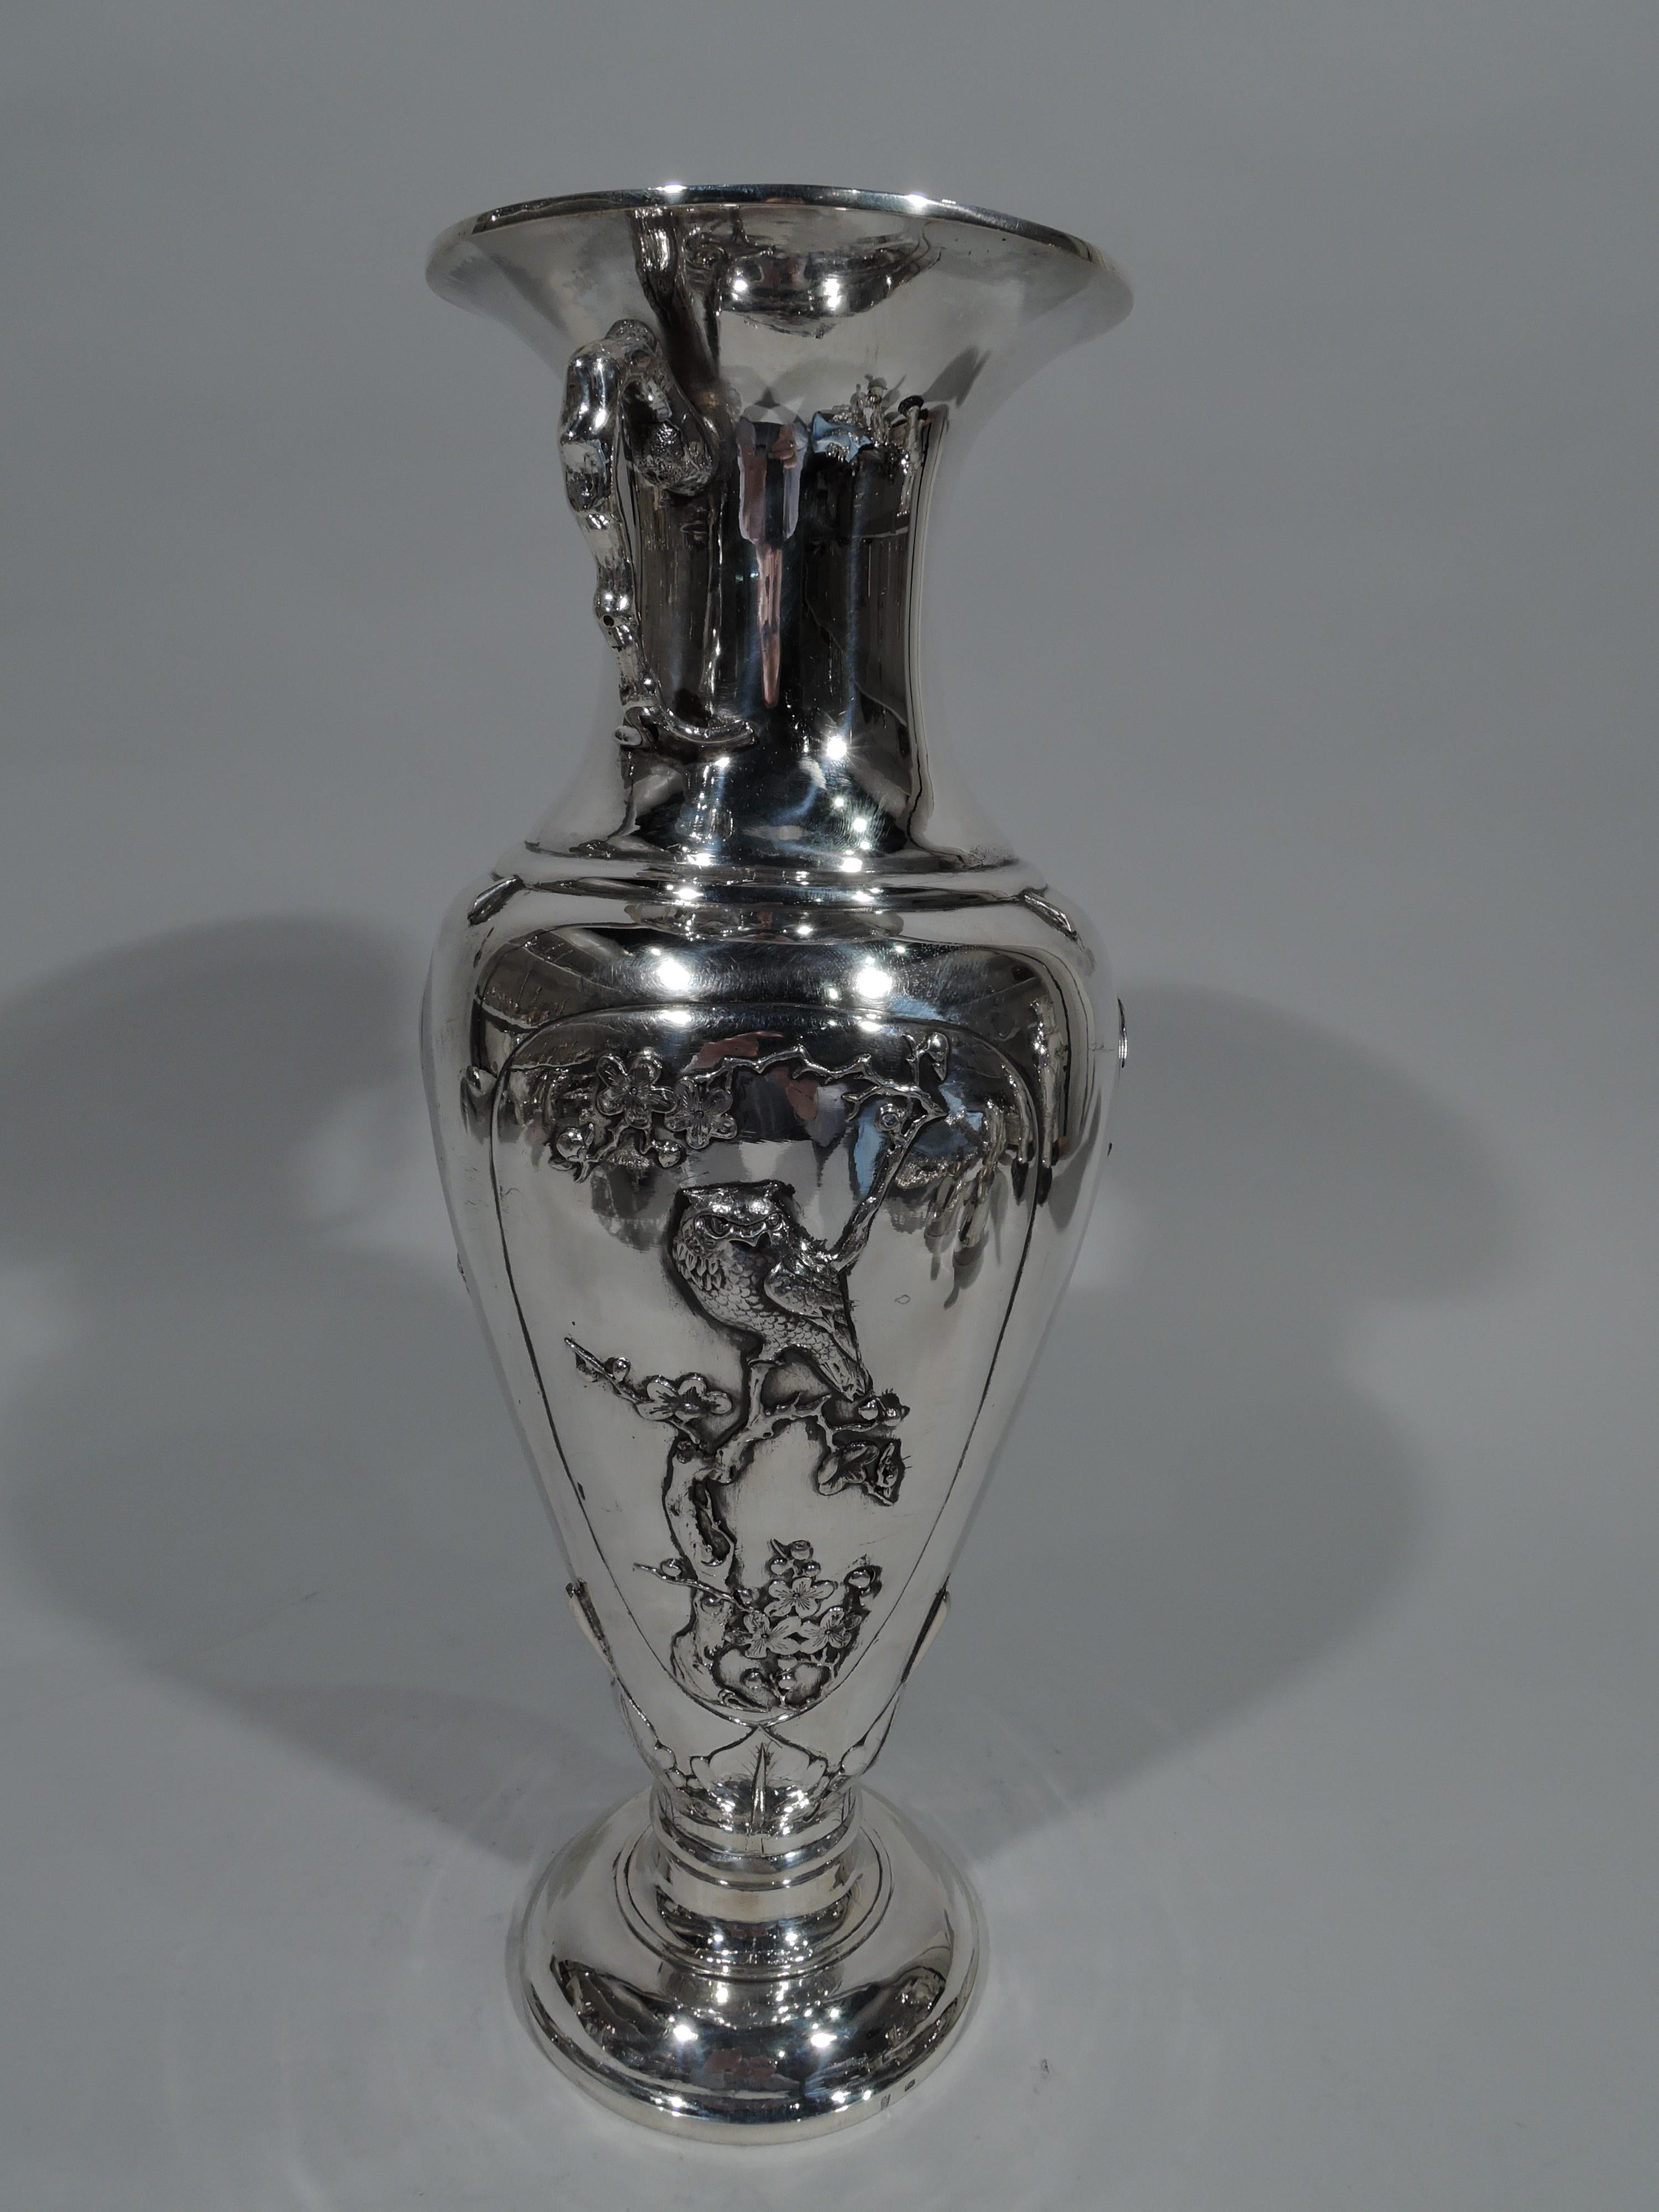 Chinese silver vase, circa 1900. Classical Amphora with domed foot, concave neck, and flared mouth. Branch-style scroll handles mounted to neck. Oval frames with bamboo, blossoming prunus branches, and perched birds including one severe owl.